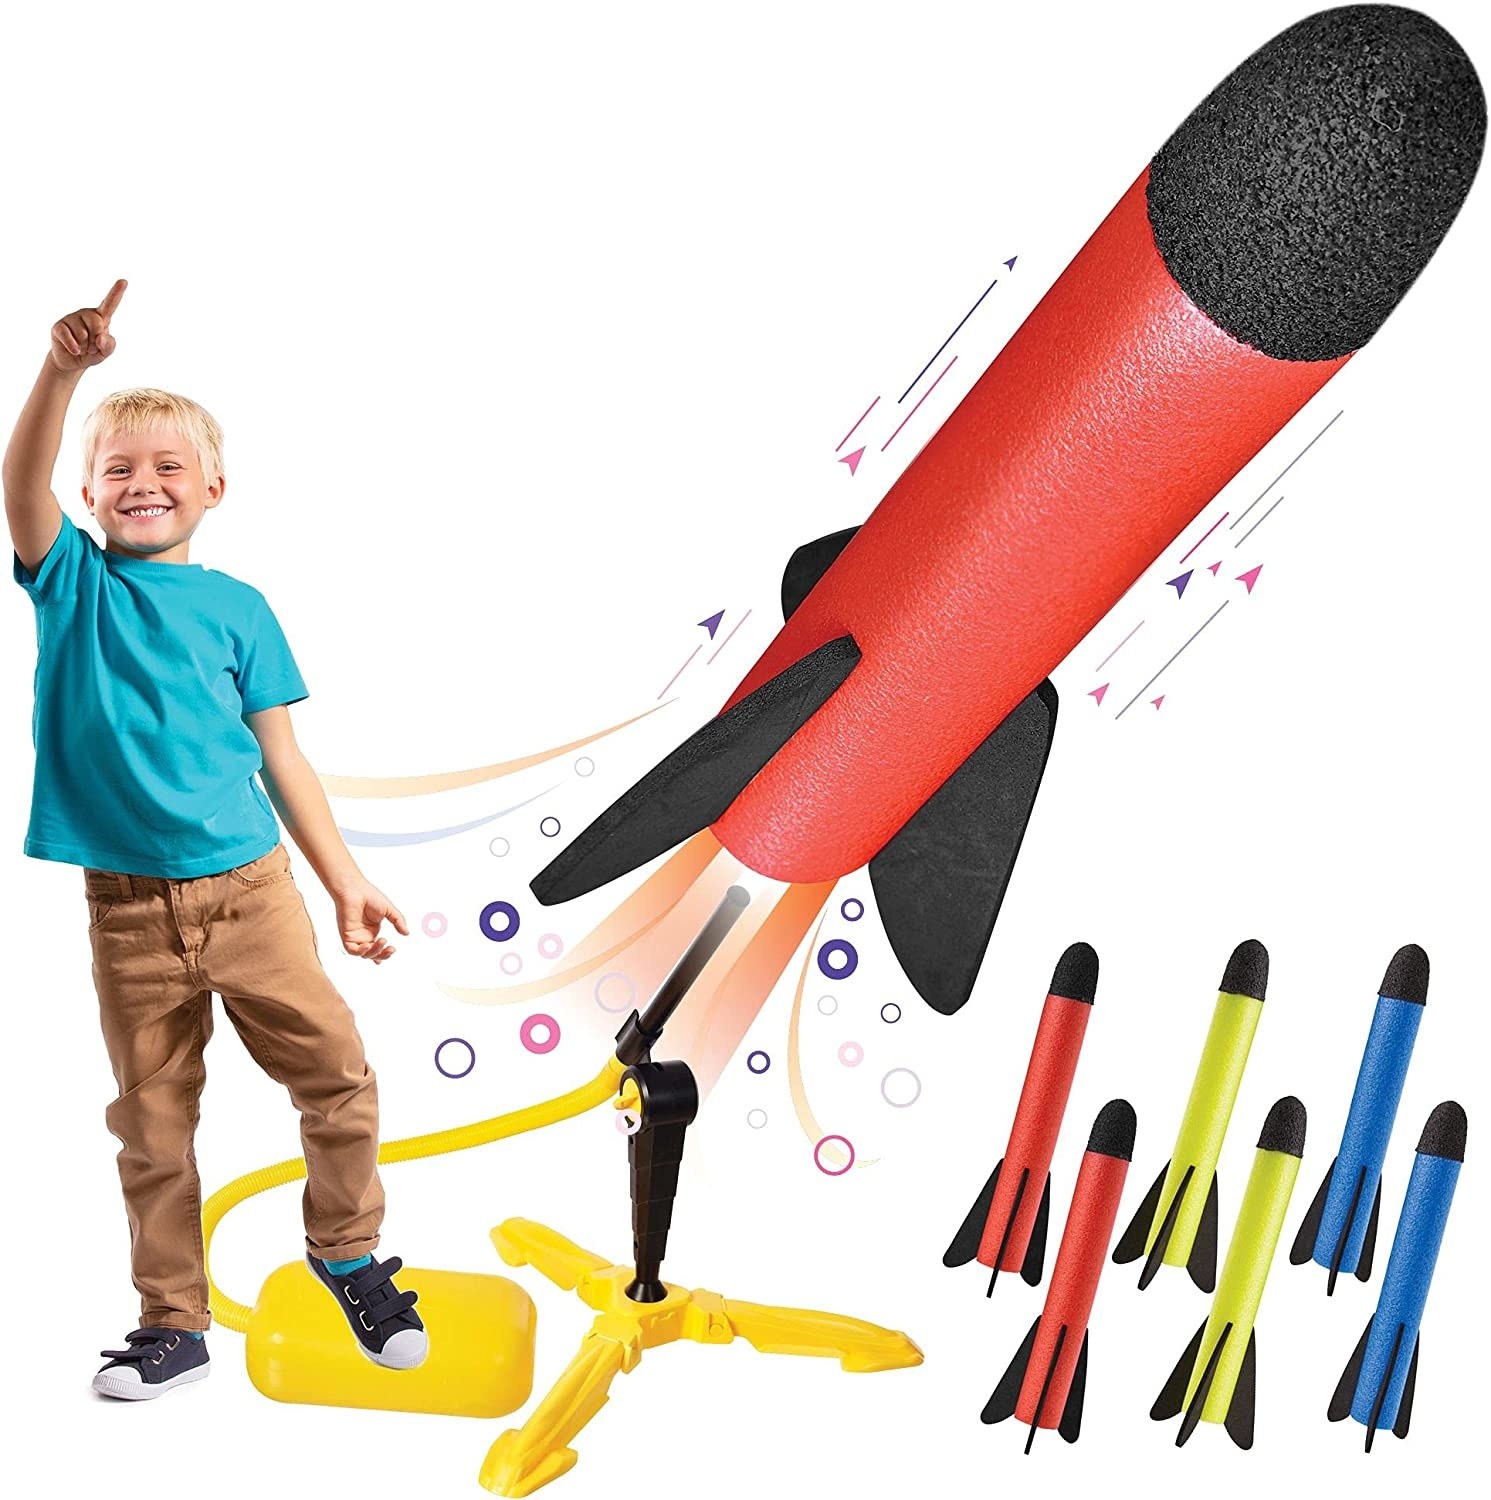 Child playing with rocket toy